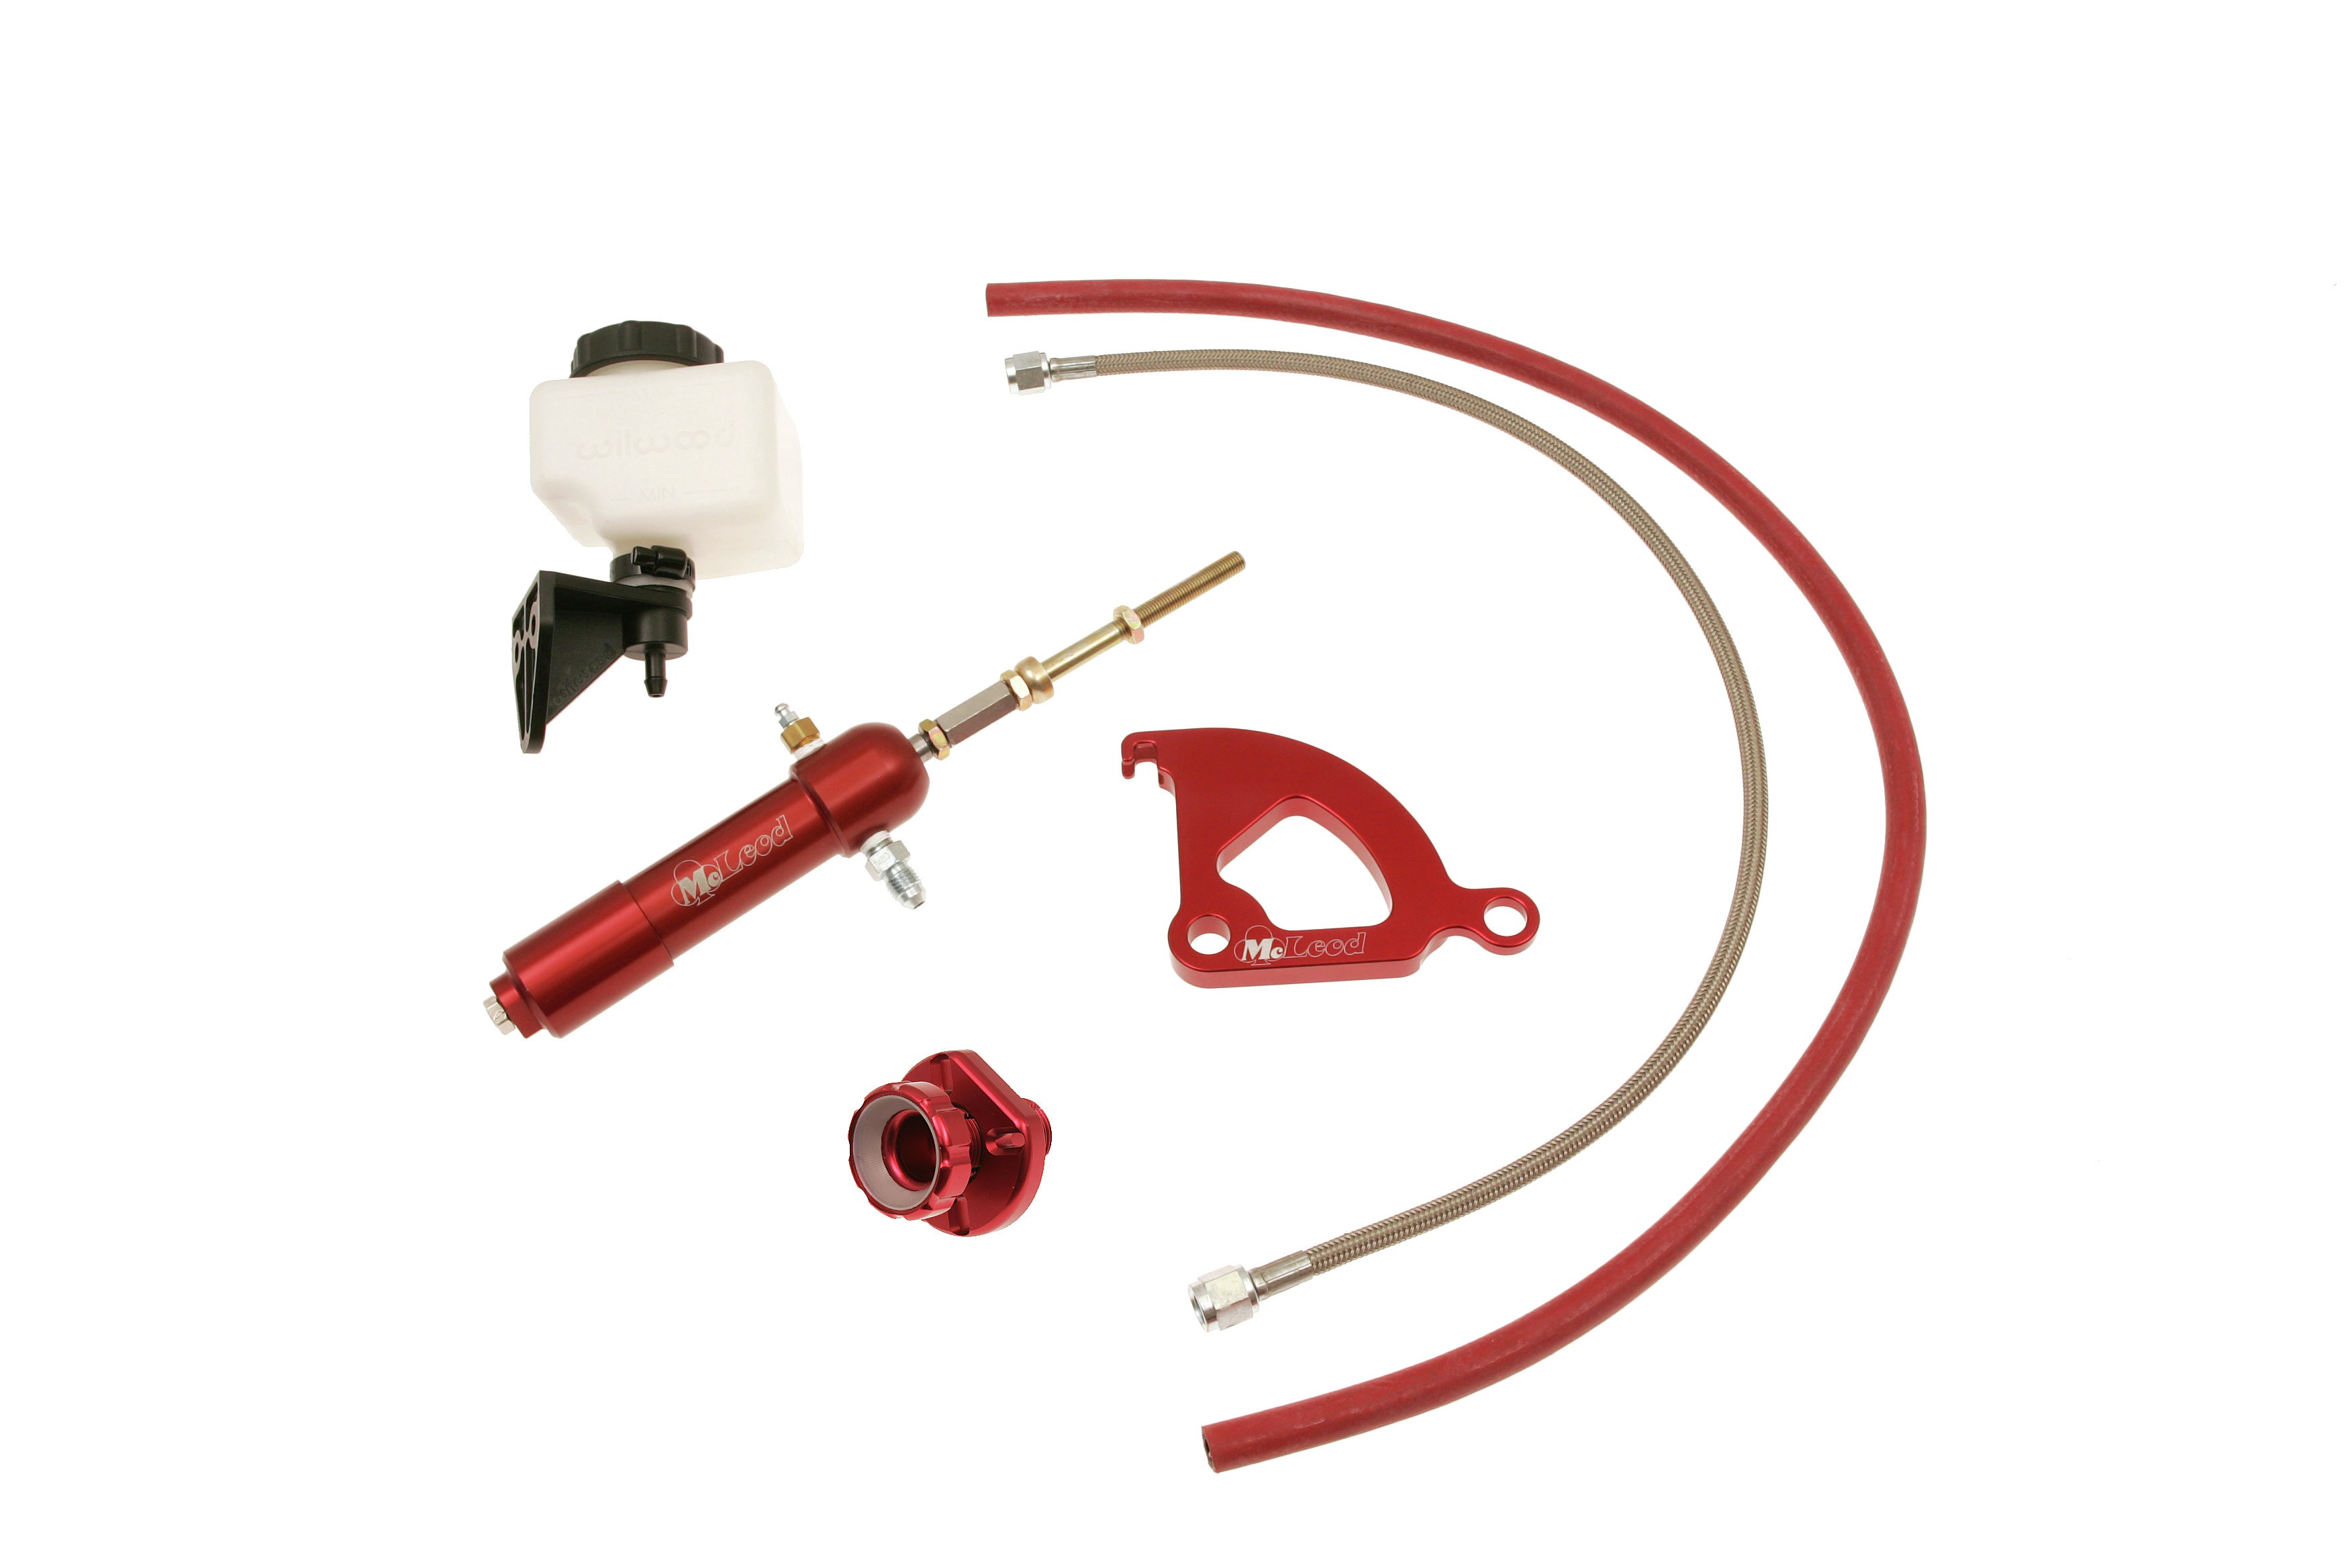 McLeod 14-326 Hydraulic T.O. Brg Kit for Mustang